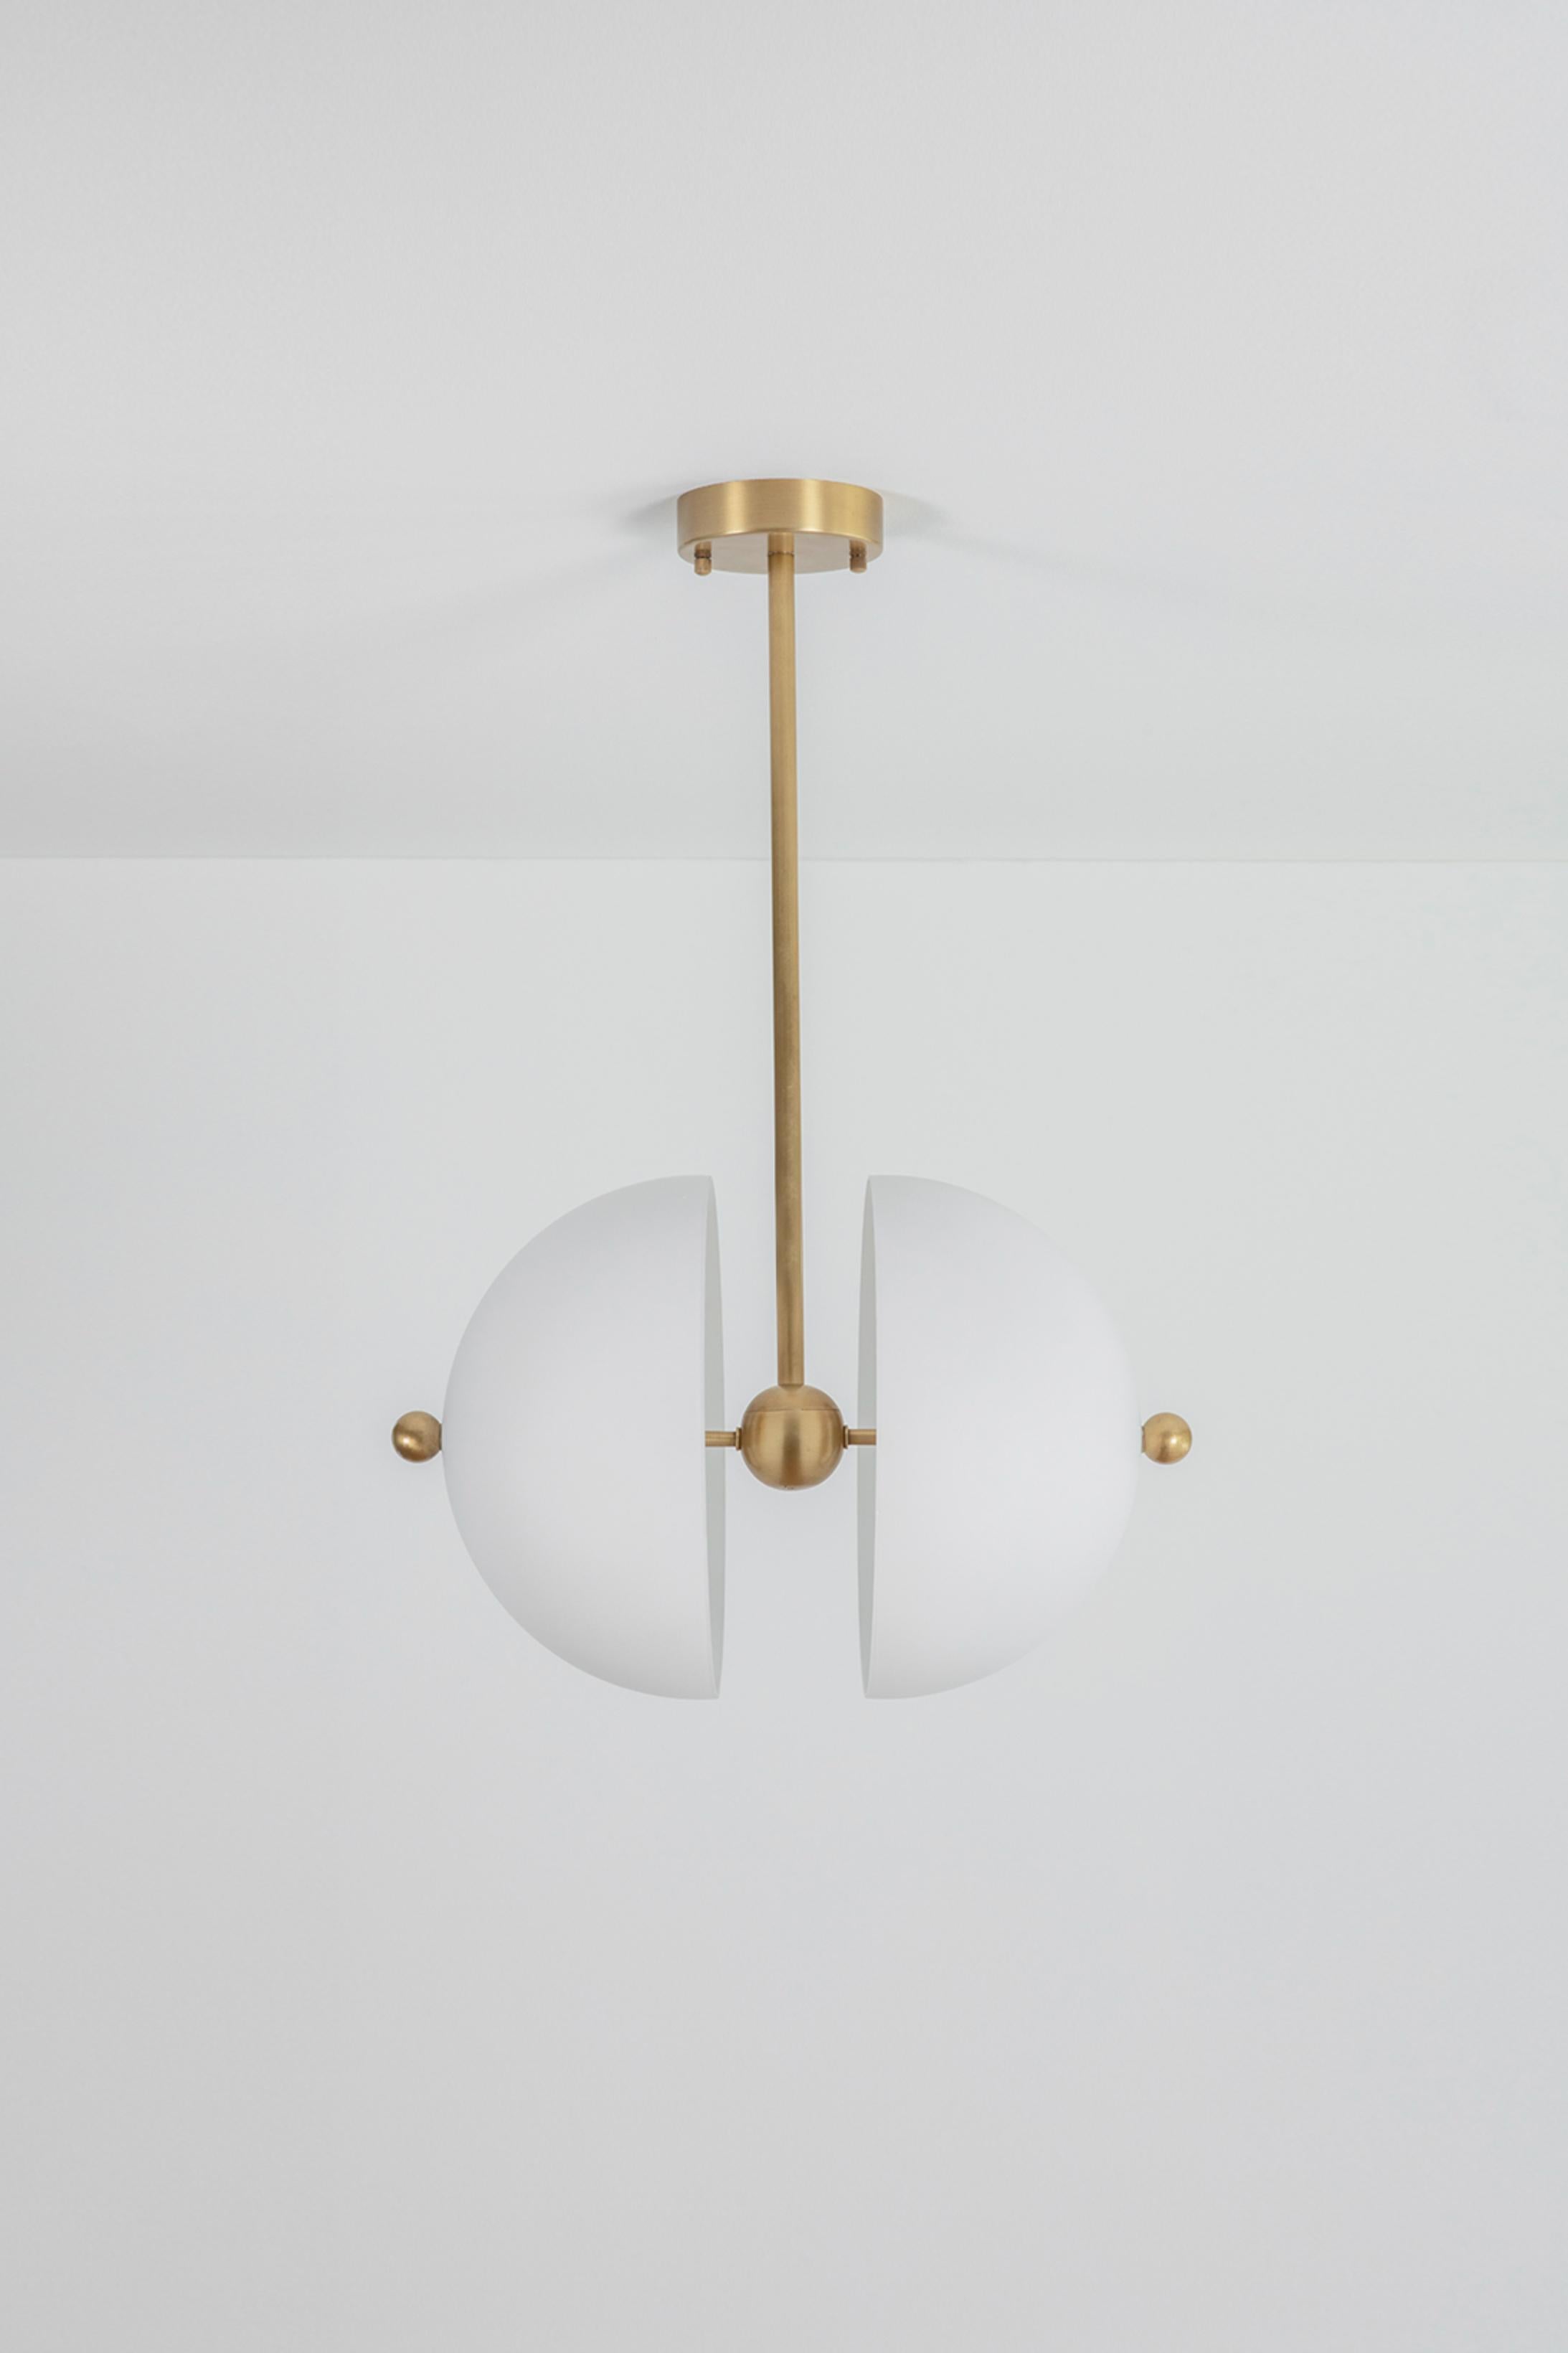 Split circle pendant lamp by Square in Circle
Dimensions: H 69 x W 45 x D 35 cm
Materials: Brushed brass finish, white lowder coated metal, white glass

Minimalistic white glass and brass pendant light. Two glass domes are attached to the brass